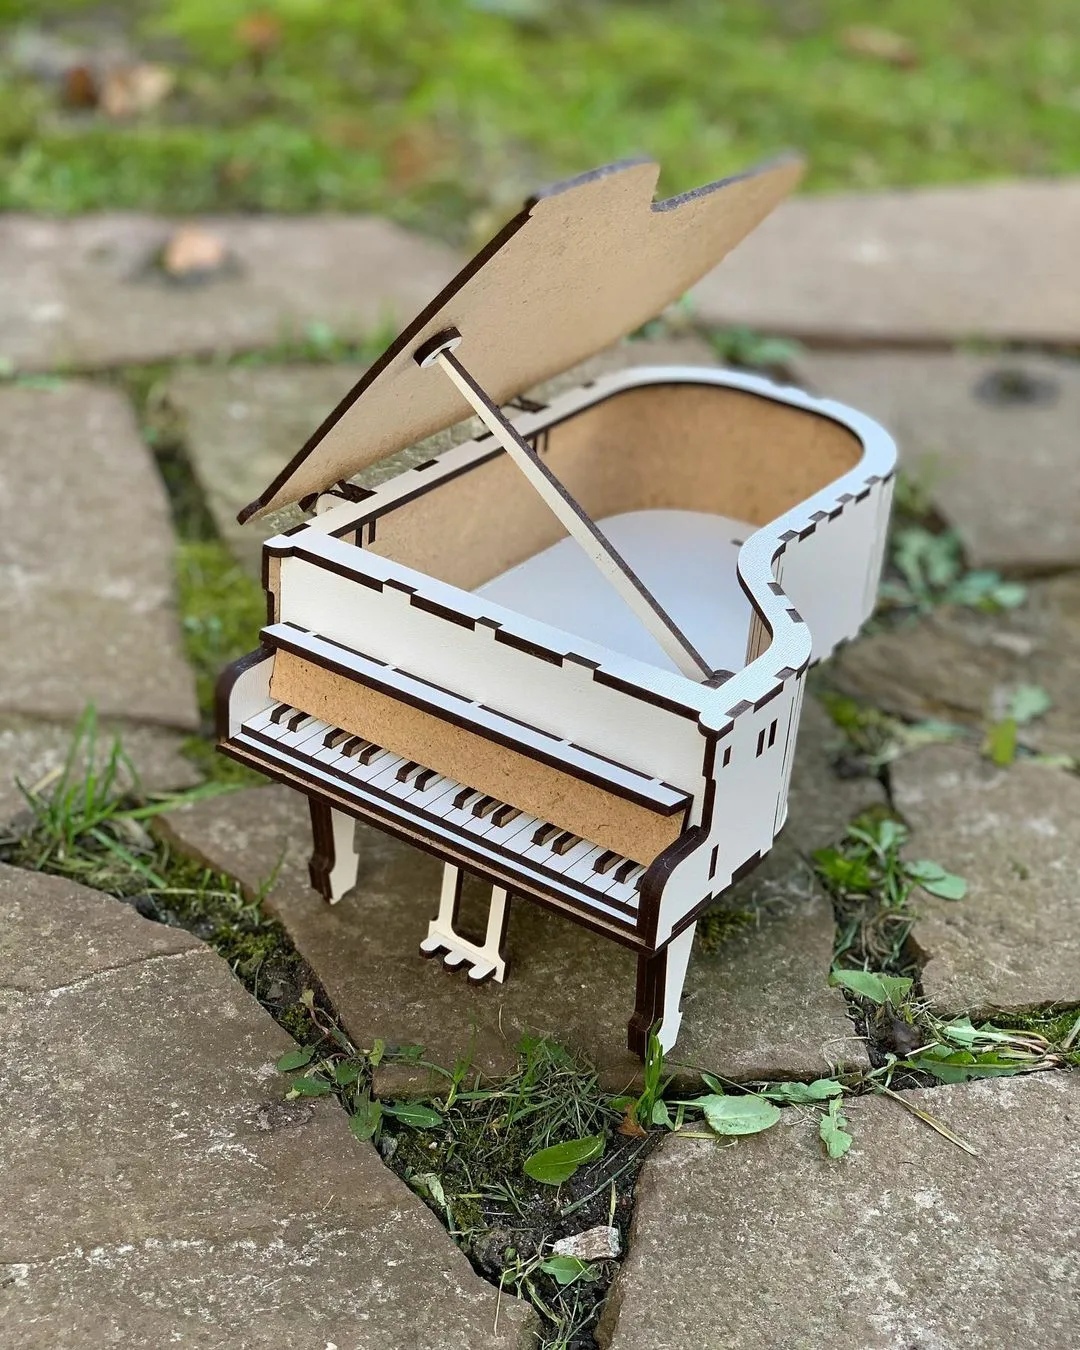 Laser Cut Piano Musical Toys For Kids Free Vector